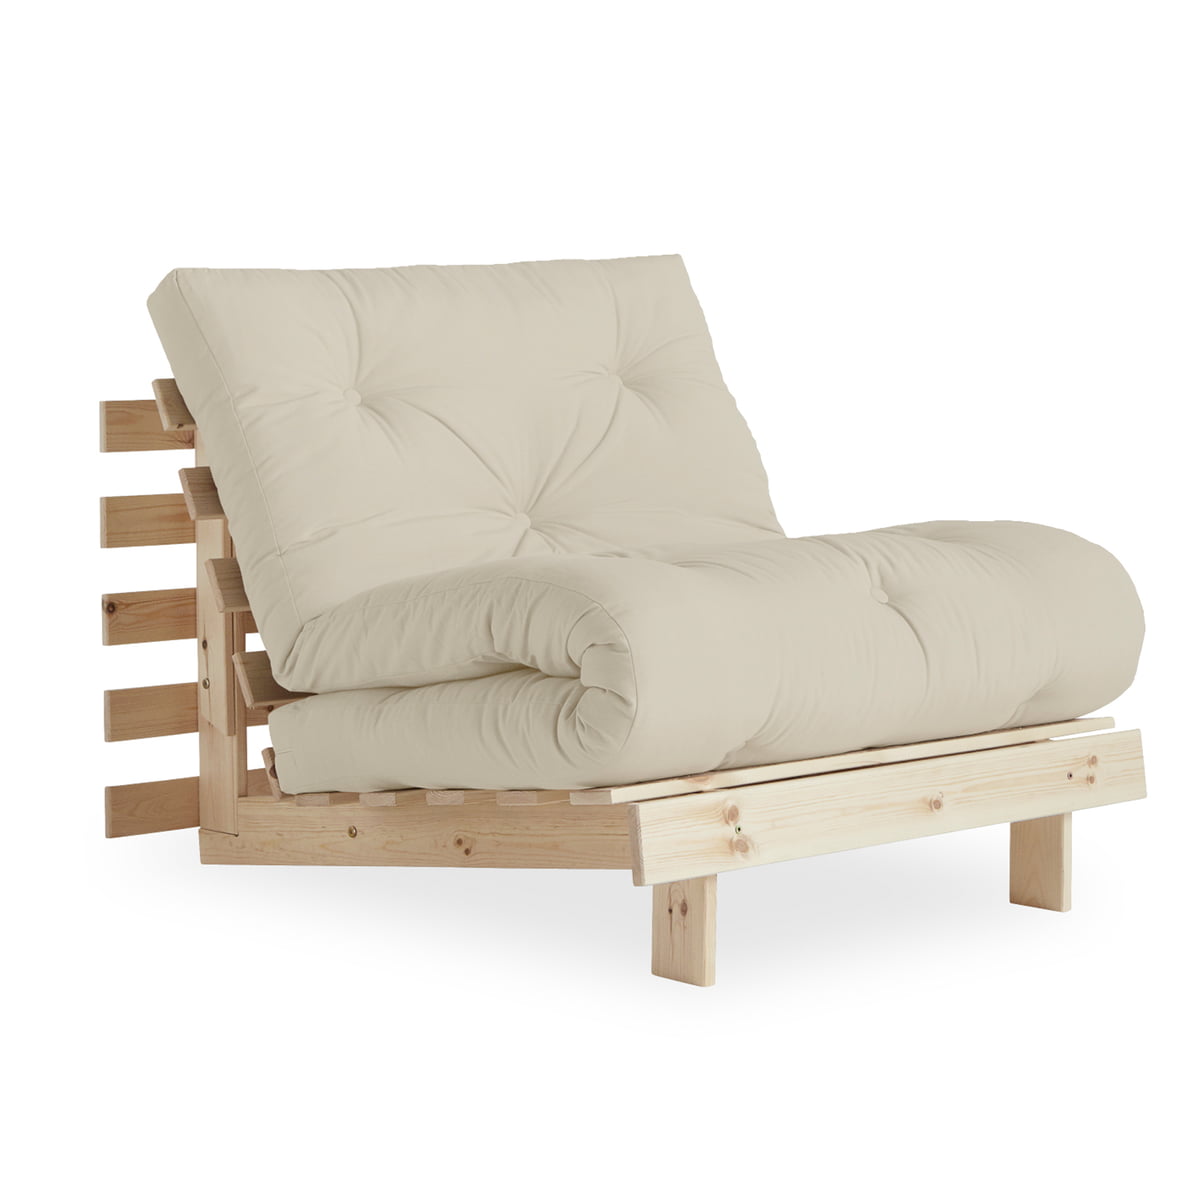 Karup Design - Roots Sleeping Connox chair 